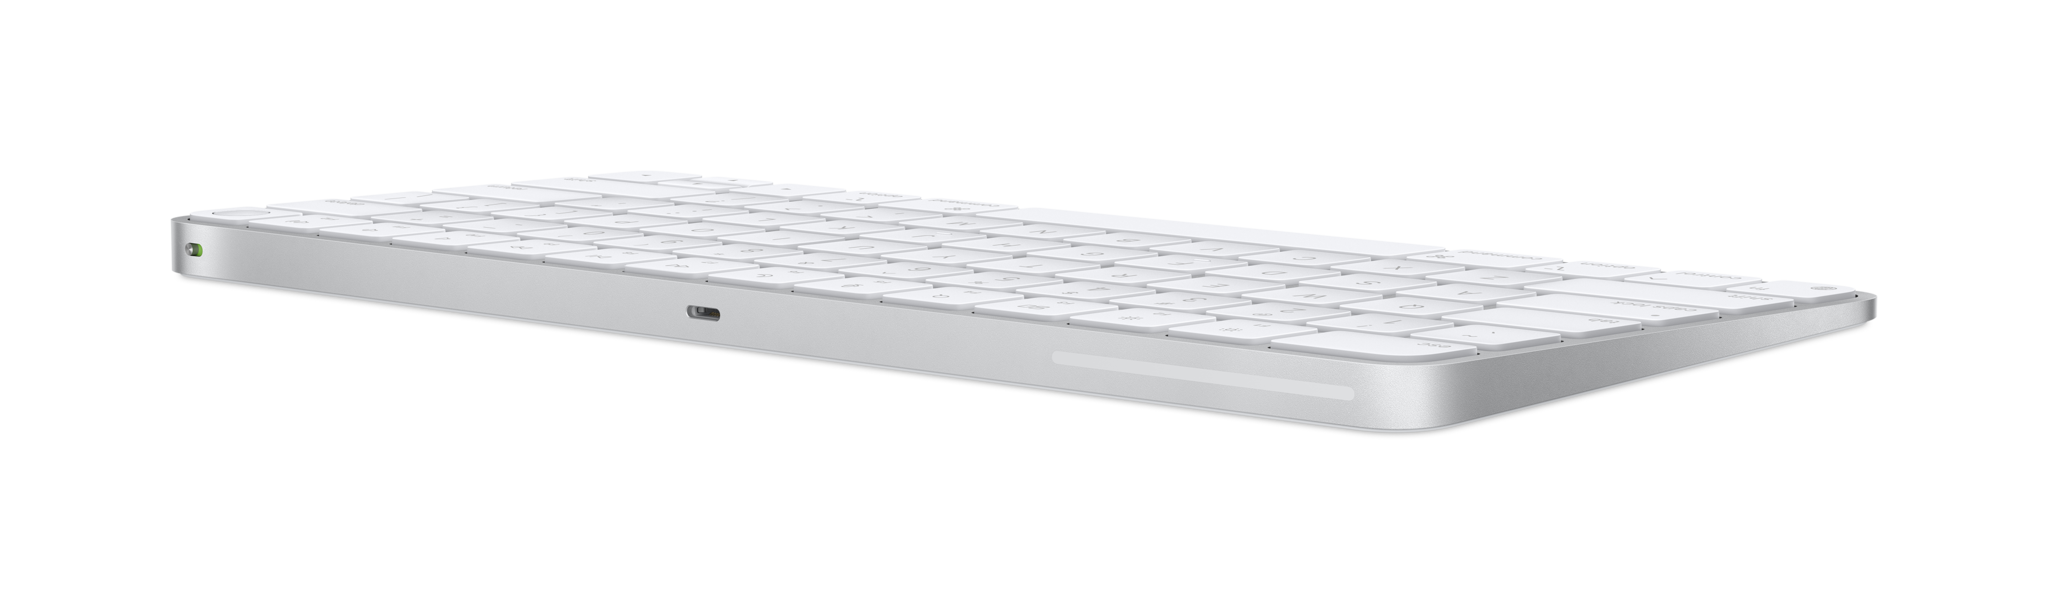 Apple Magic Keyboard with Touch ID - US English - Campus Computer 